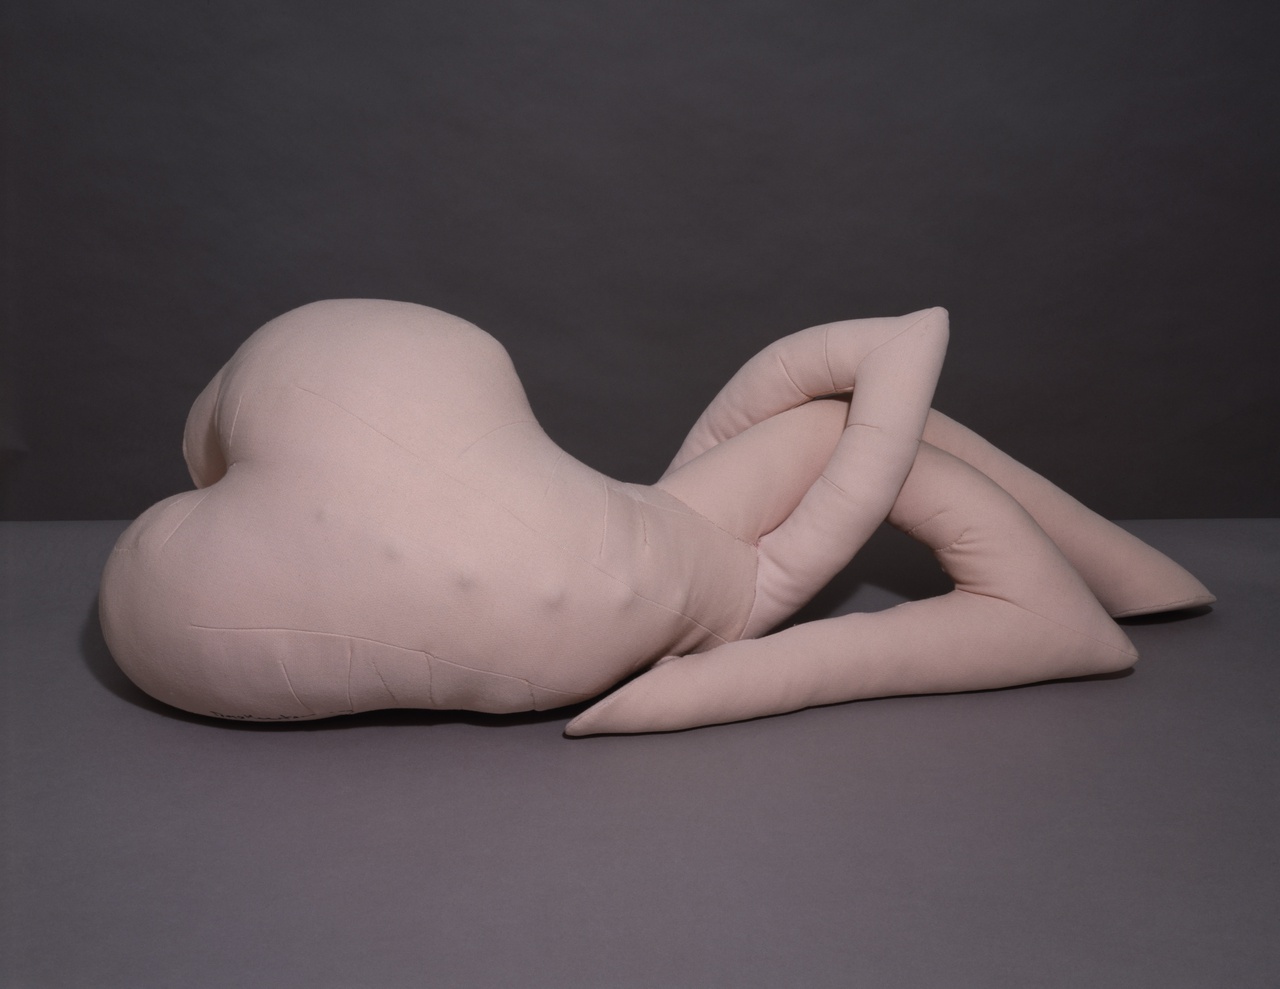 Dorothea Tanning, Nue couchée ,1969-70, Photo ©Tate.jpg